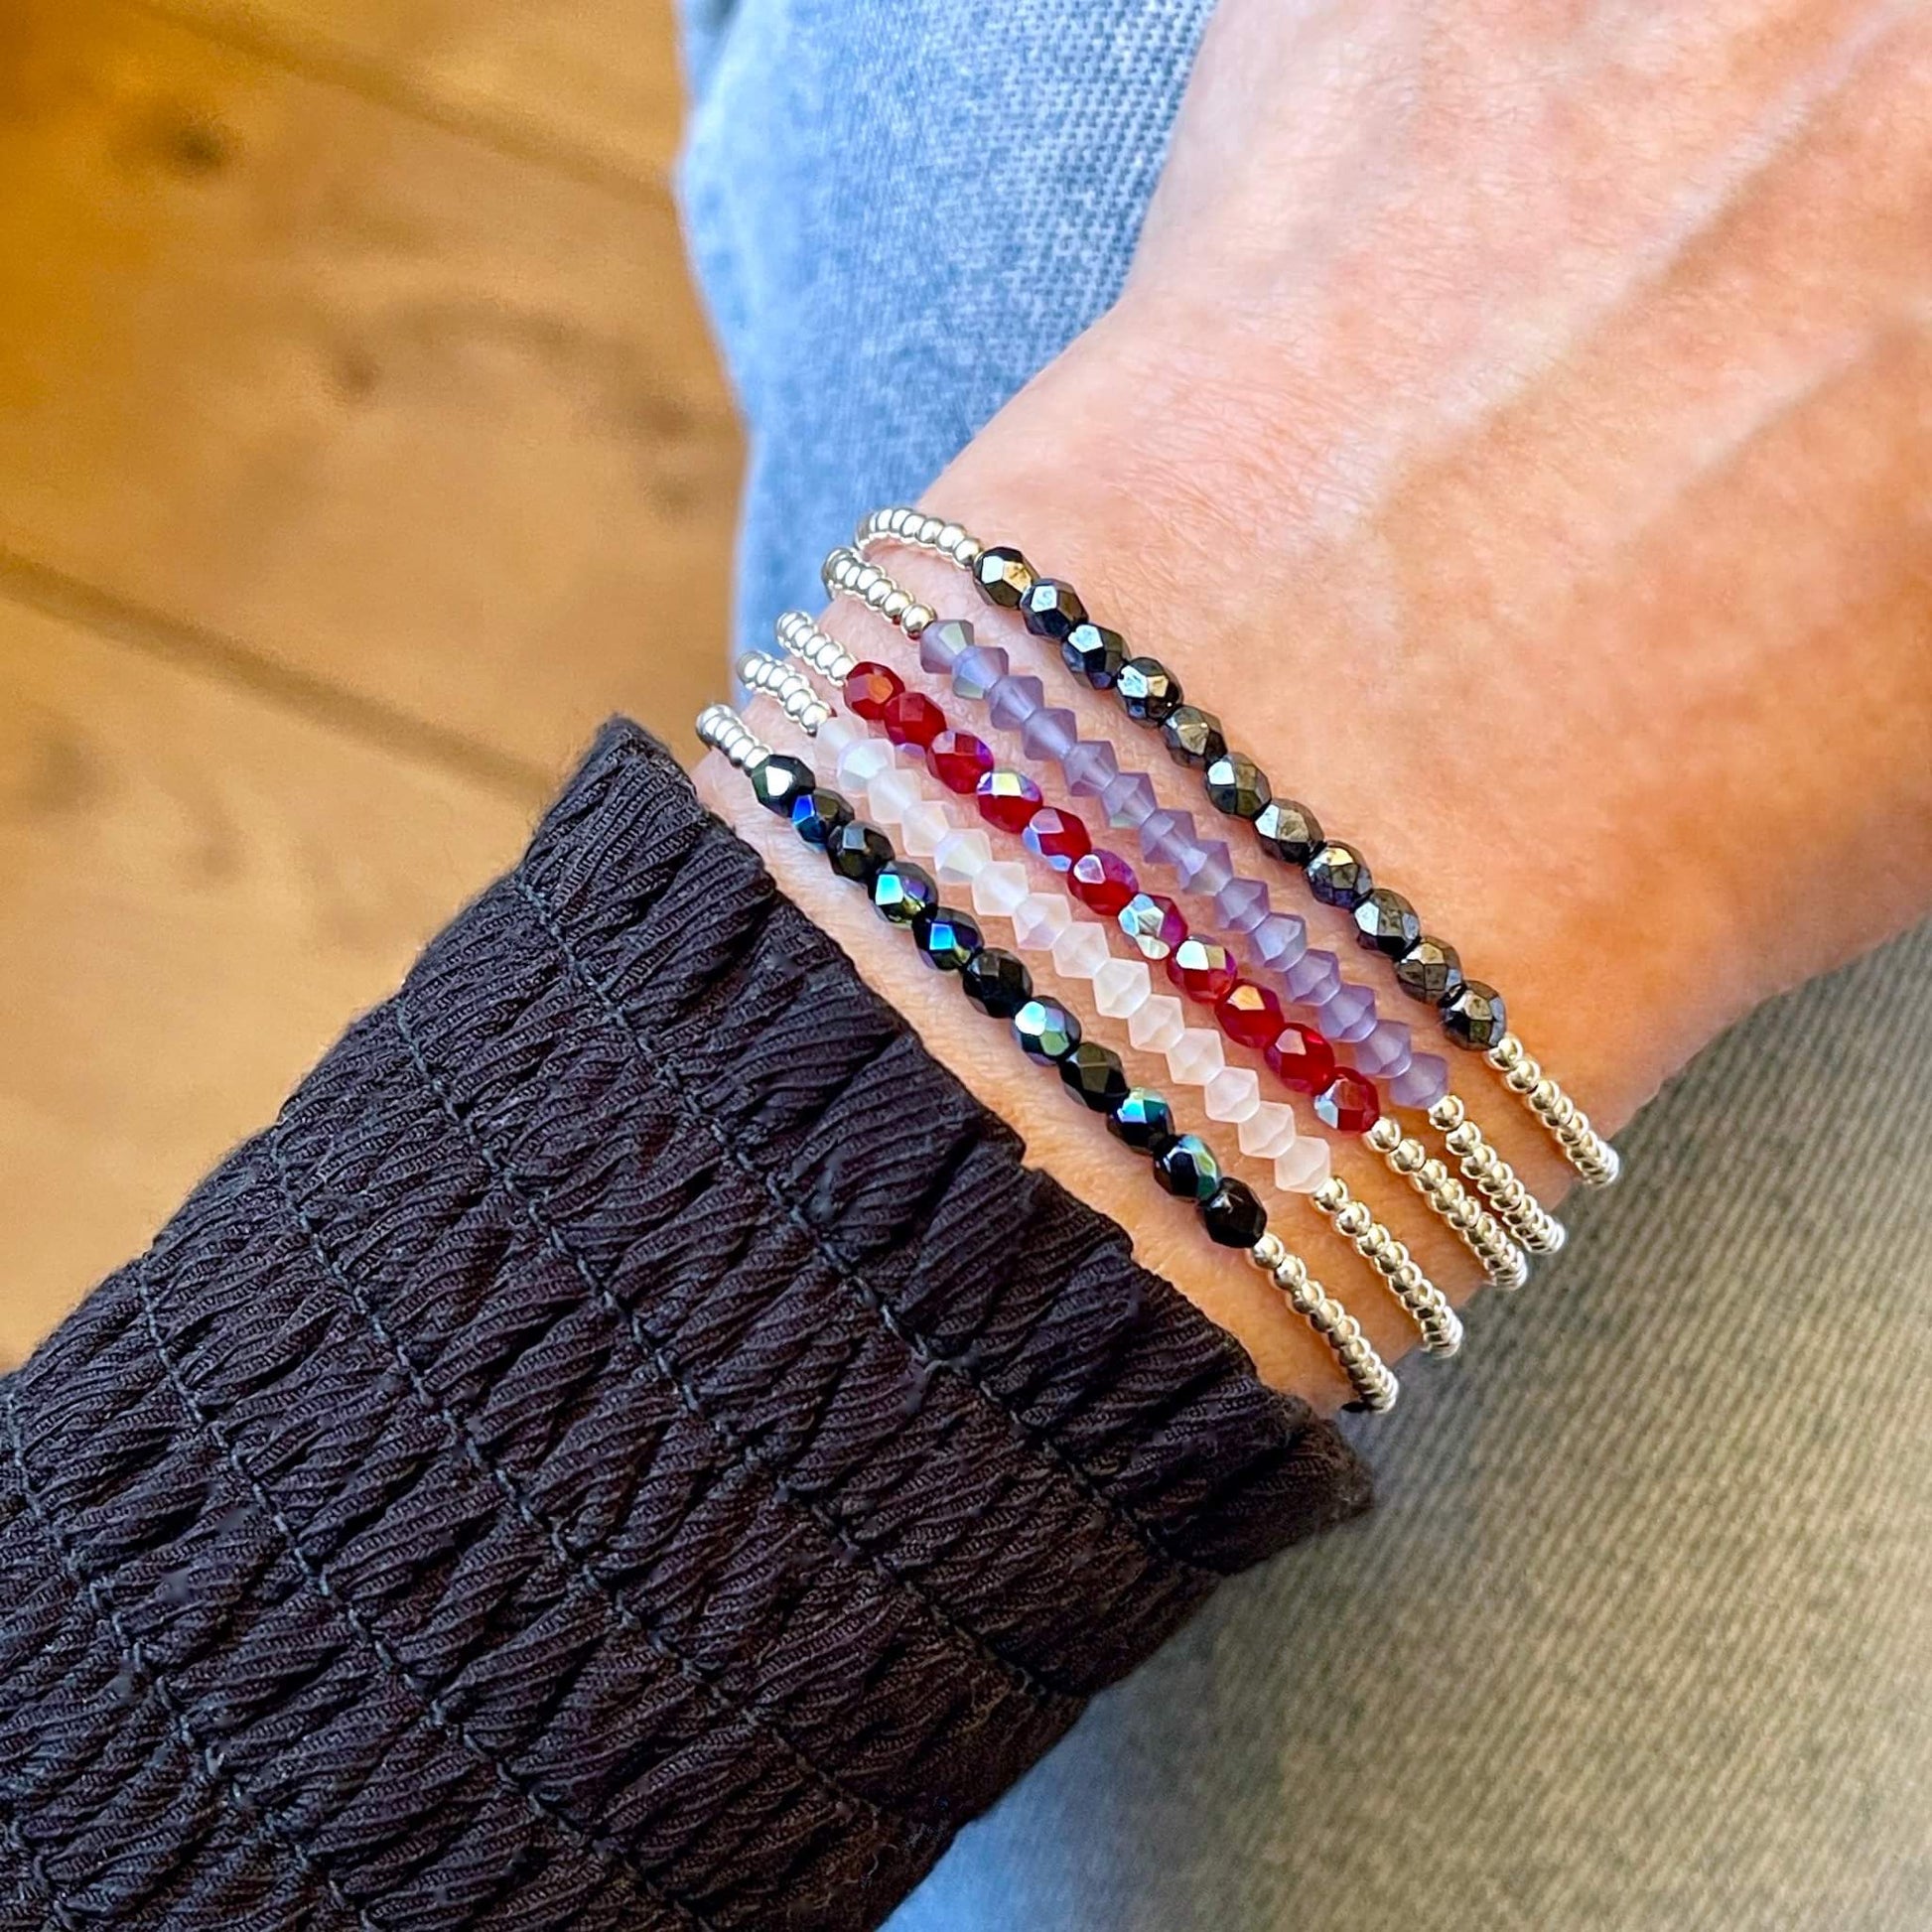 Dainty silver stretch bracelets with tiny crystal beads arranged in a center color bar. Choice of blue, white, red, lavender, or black crystals.